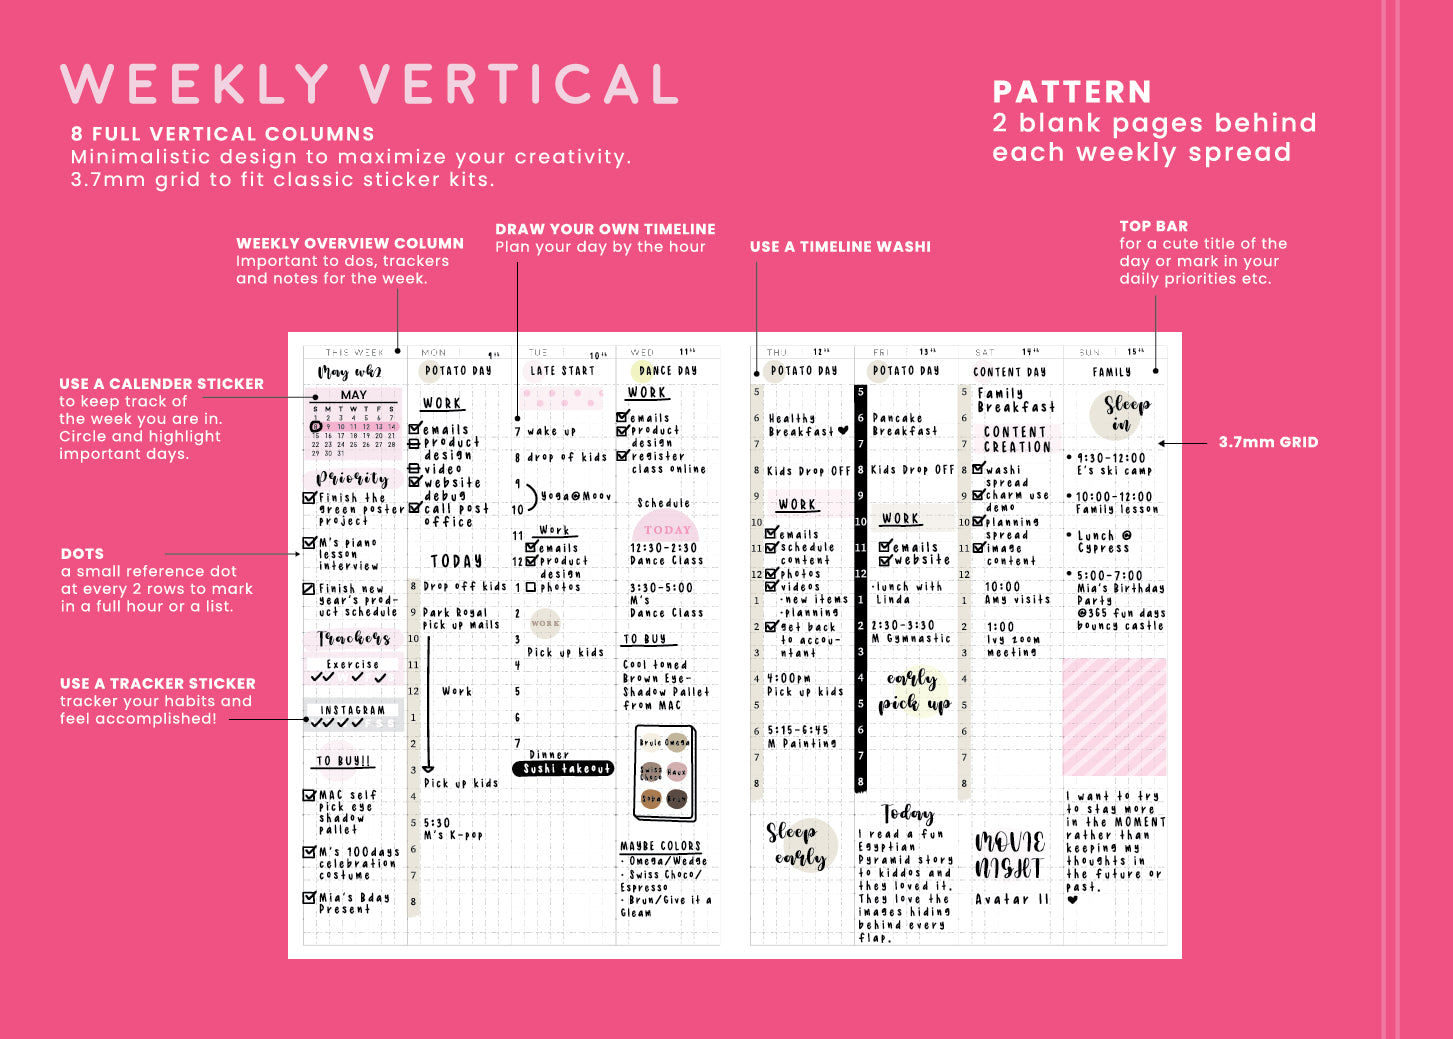 b6_complete_weekly_vertical_layout